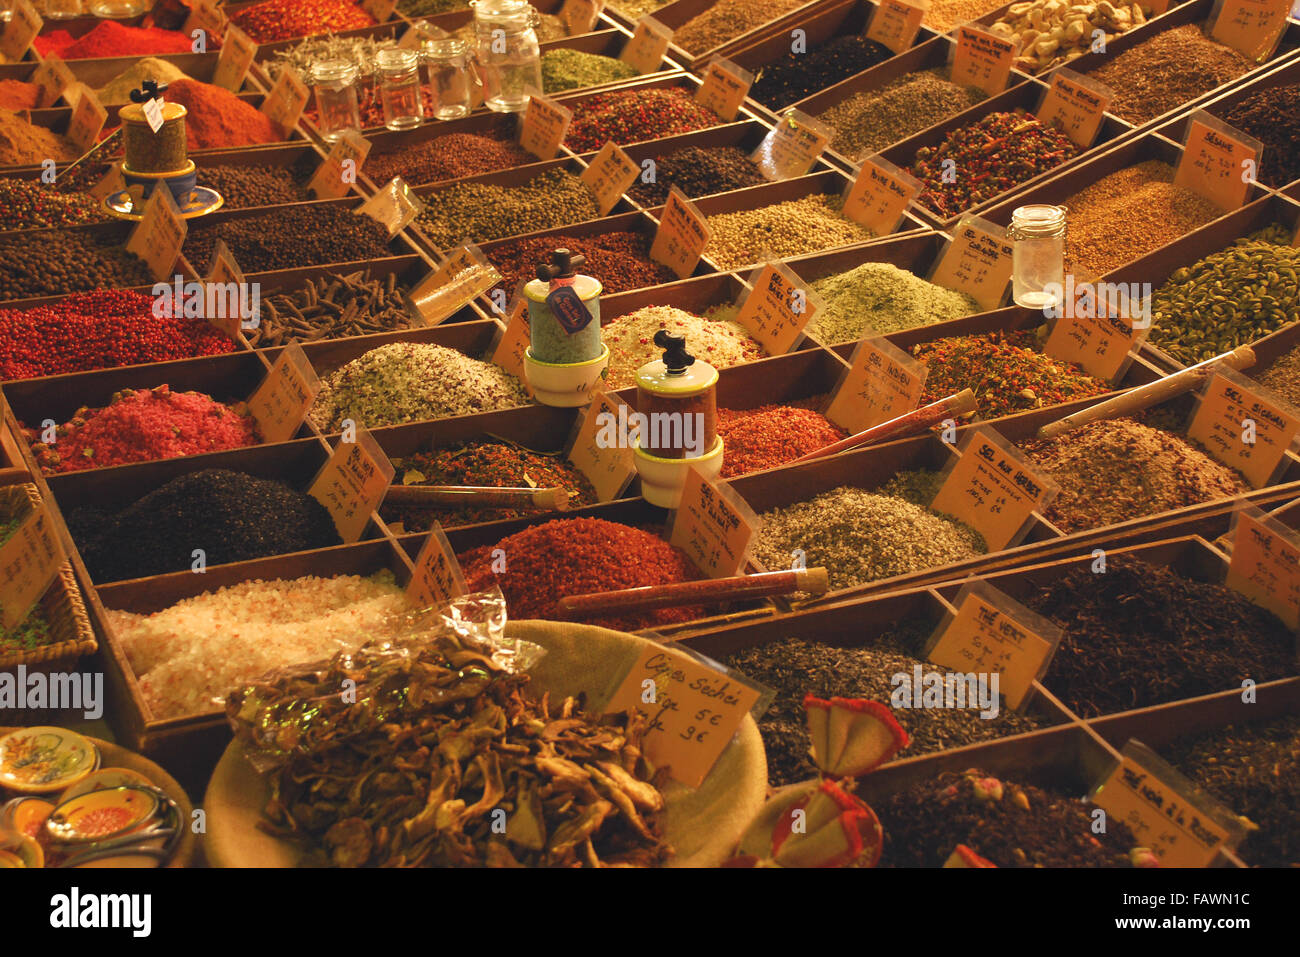 Herbs and Spices in Local Market, Antibes, France Stock Photo